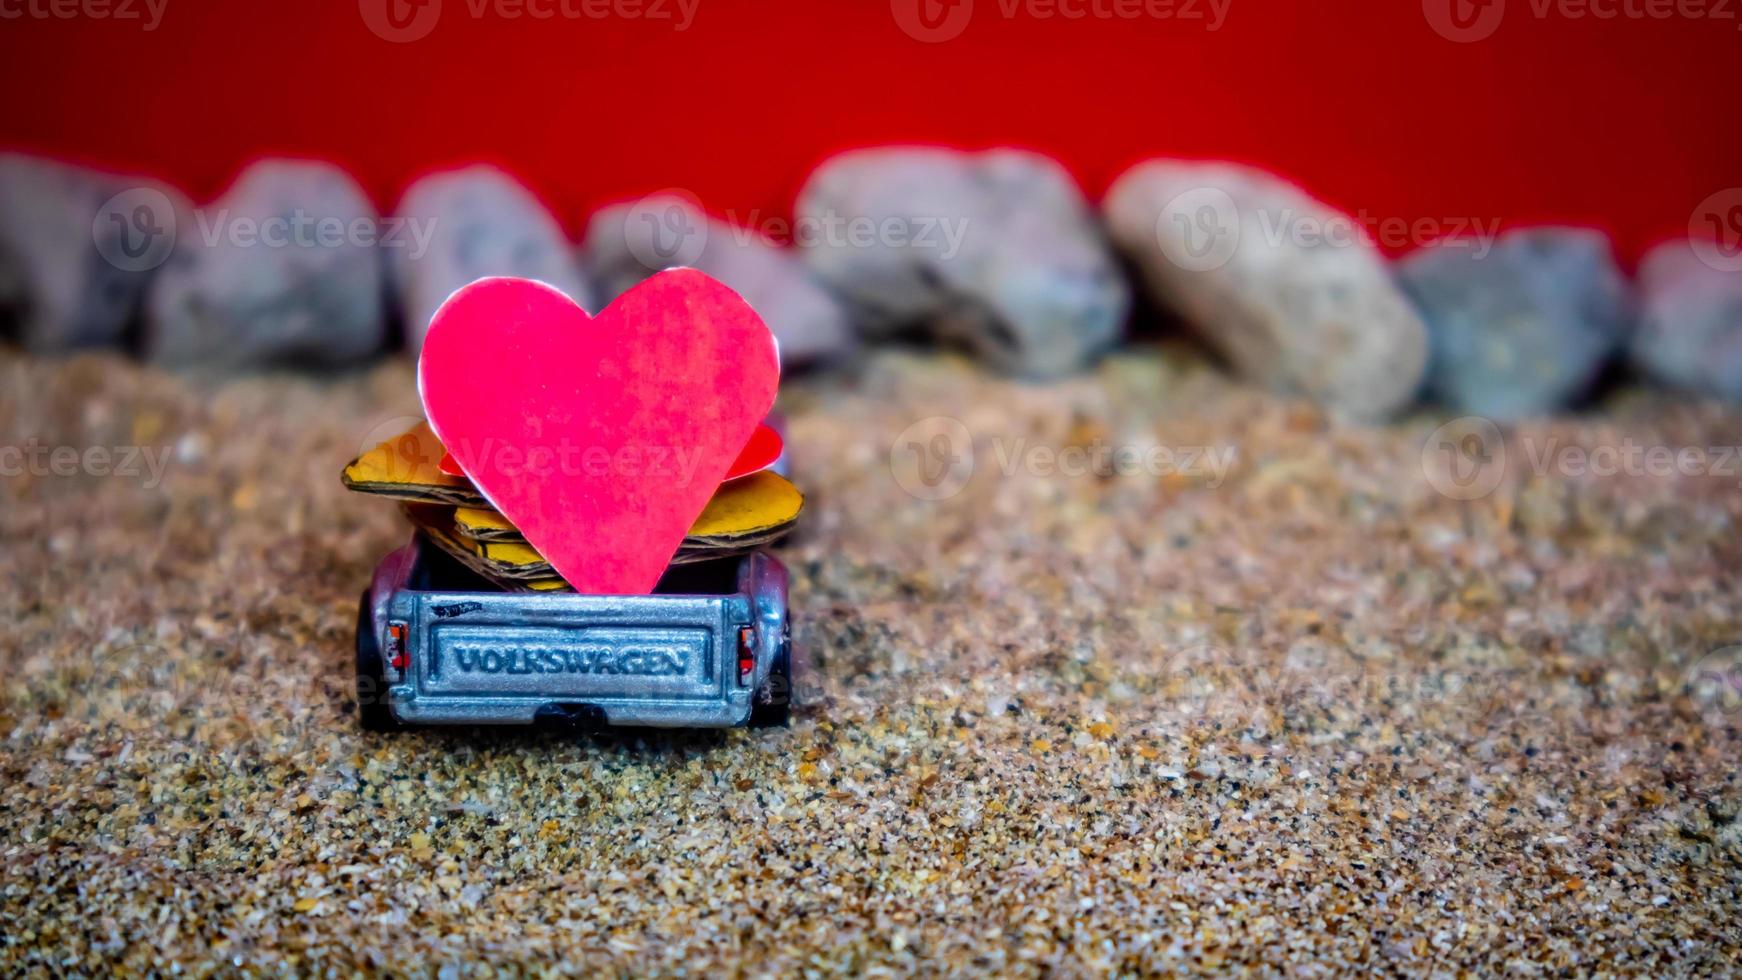 Minahasa, Indonesia December 2022, the toy cars transporting hearts photo